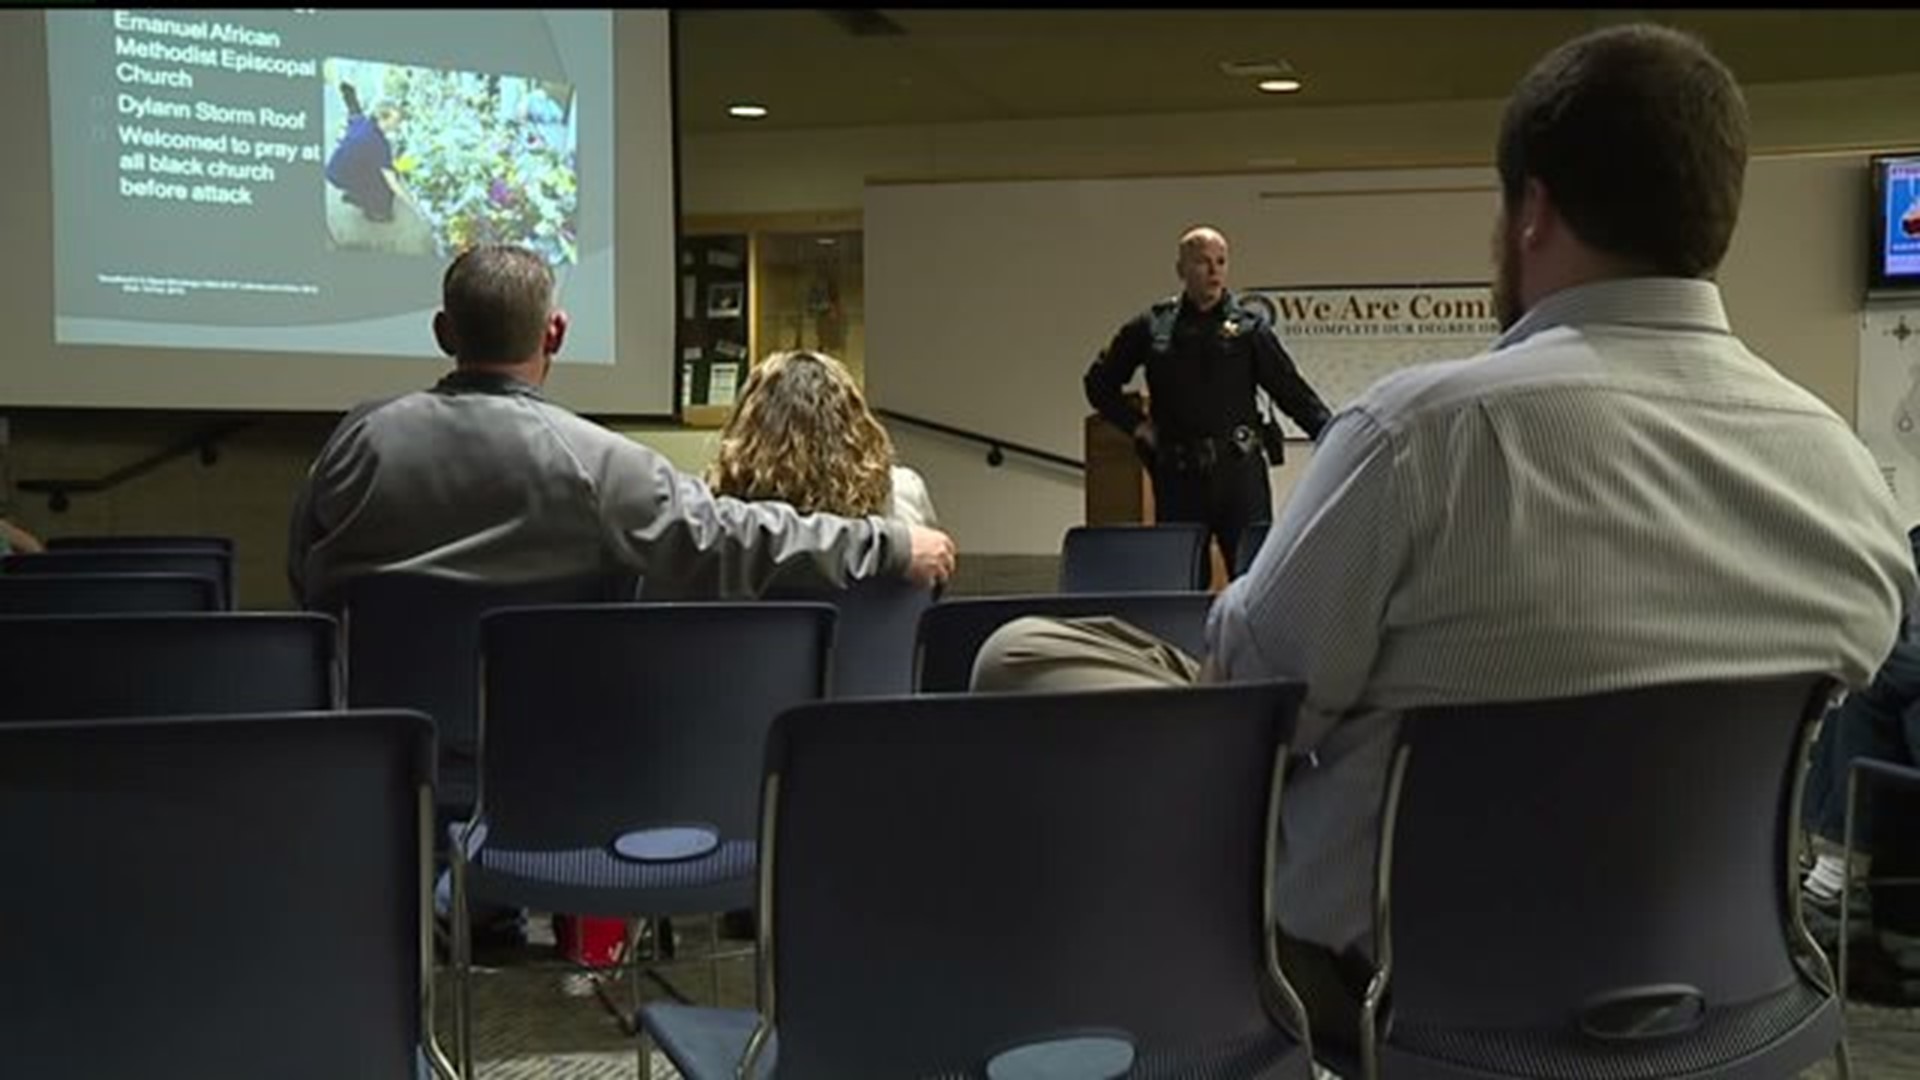 Galesburg Active Shooter Forum